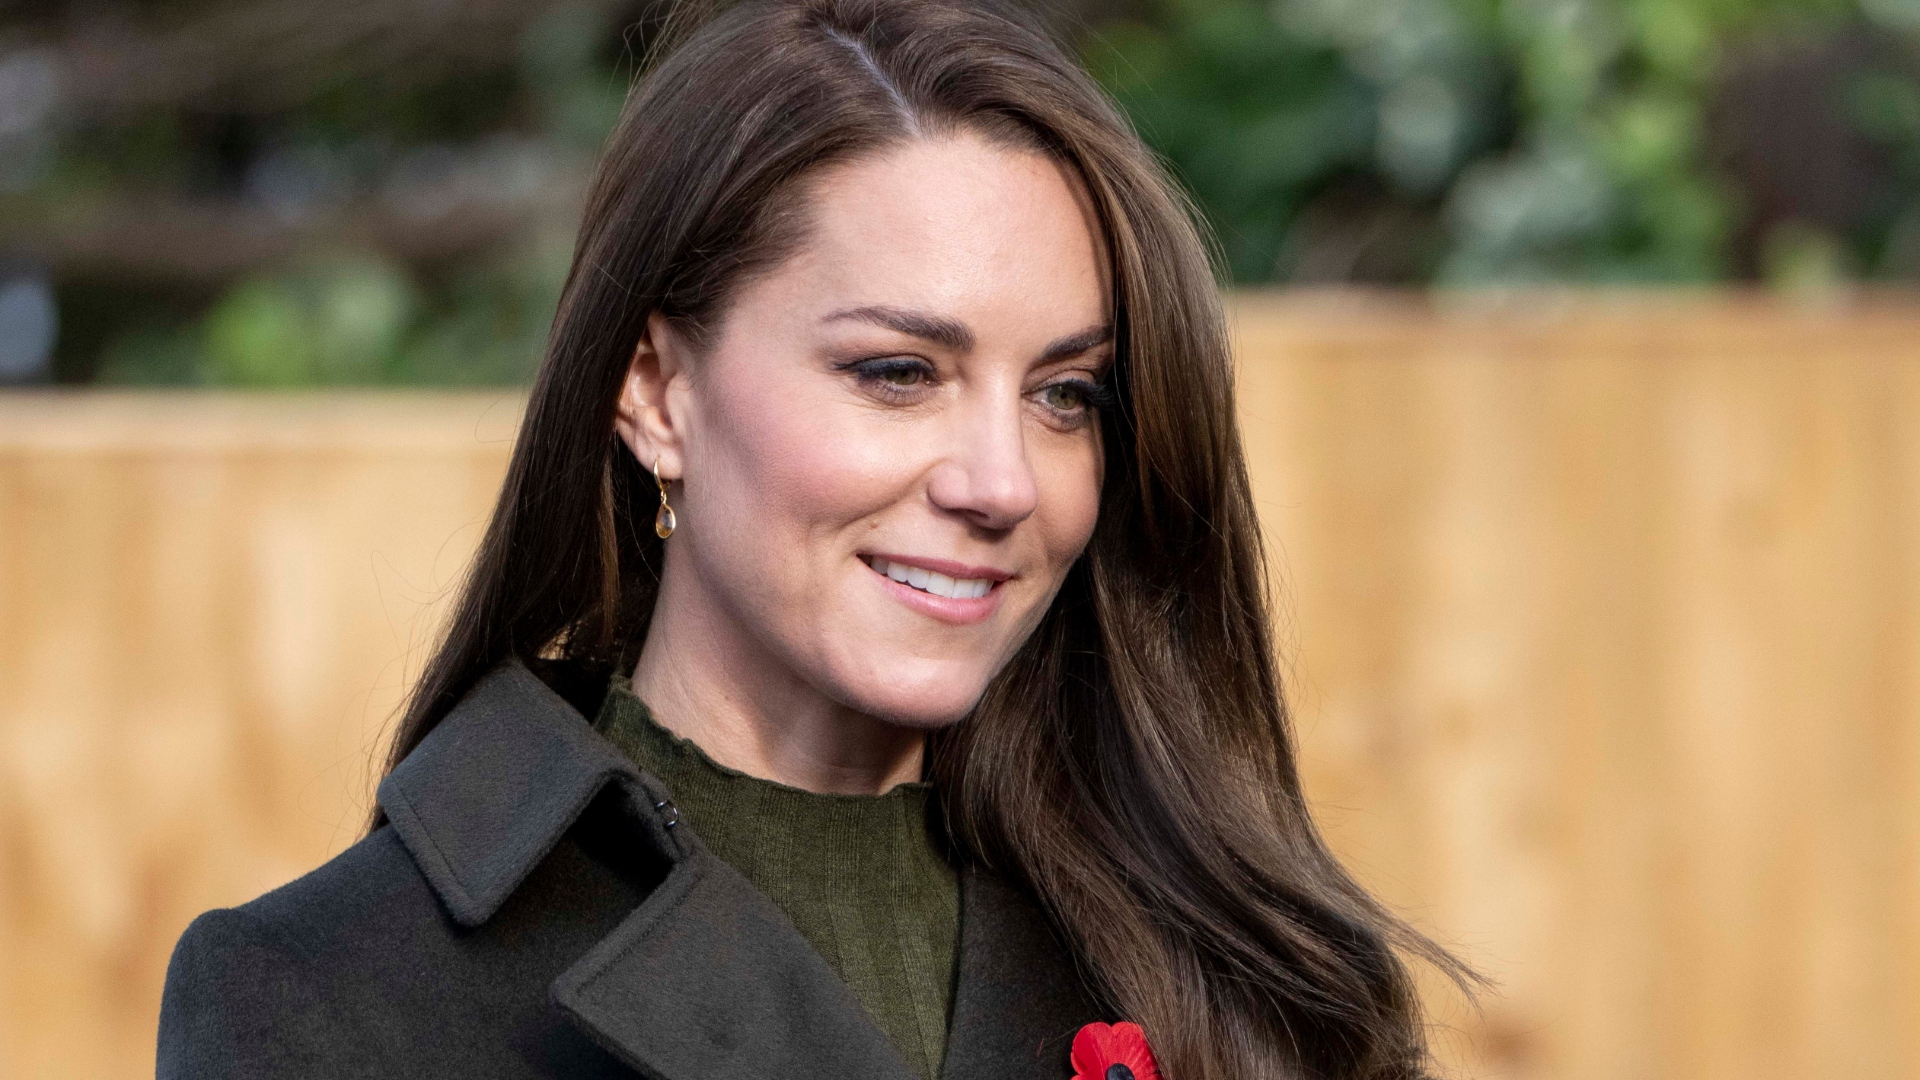 Kate Middleton Wears Olive Green Outfit For Children's Centre Visit